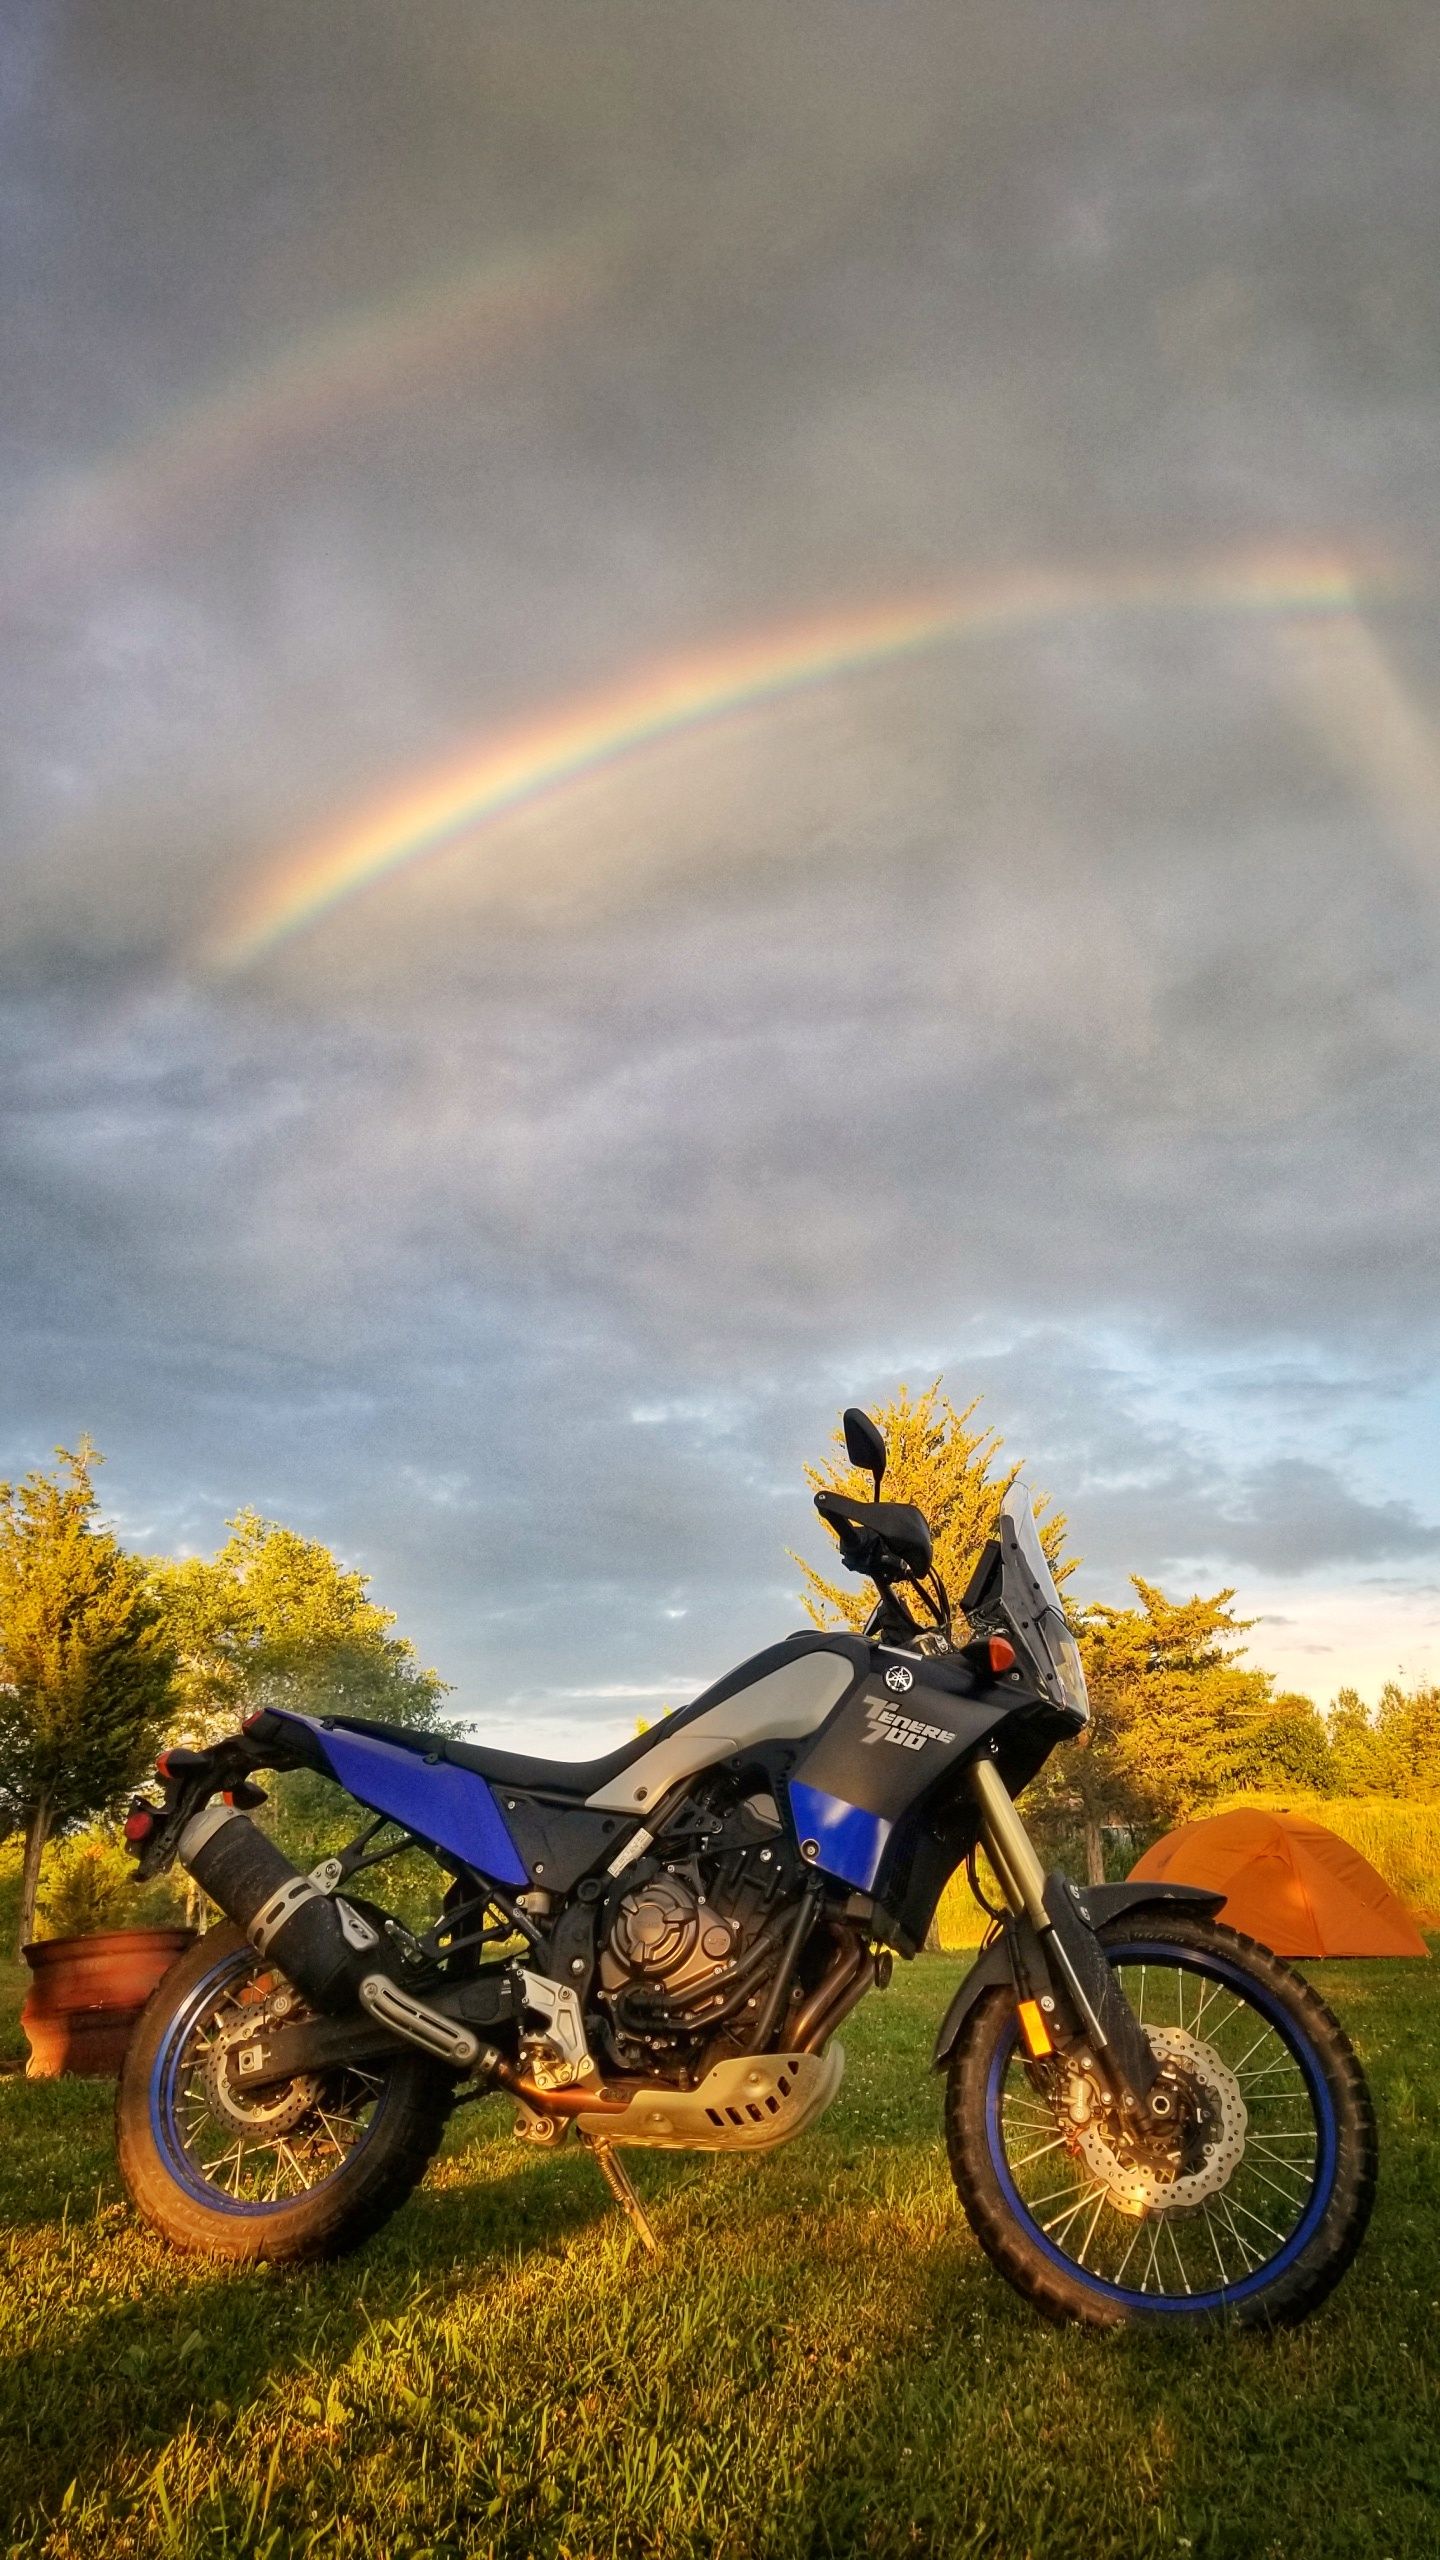 Camping with the Tenere 700 and a double rainbow!